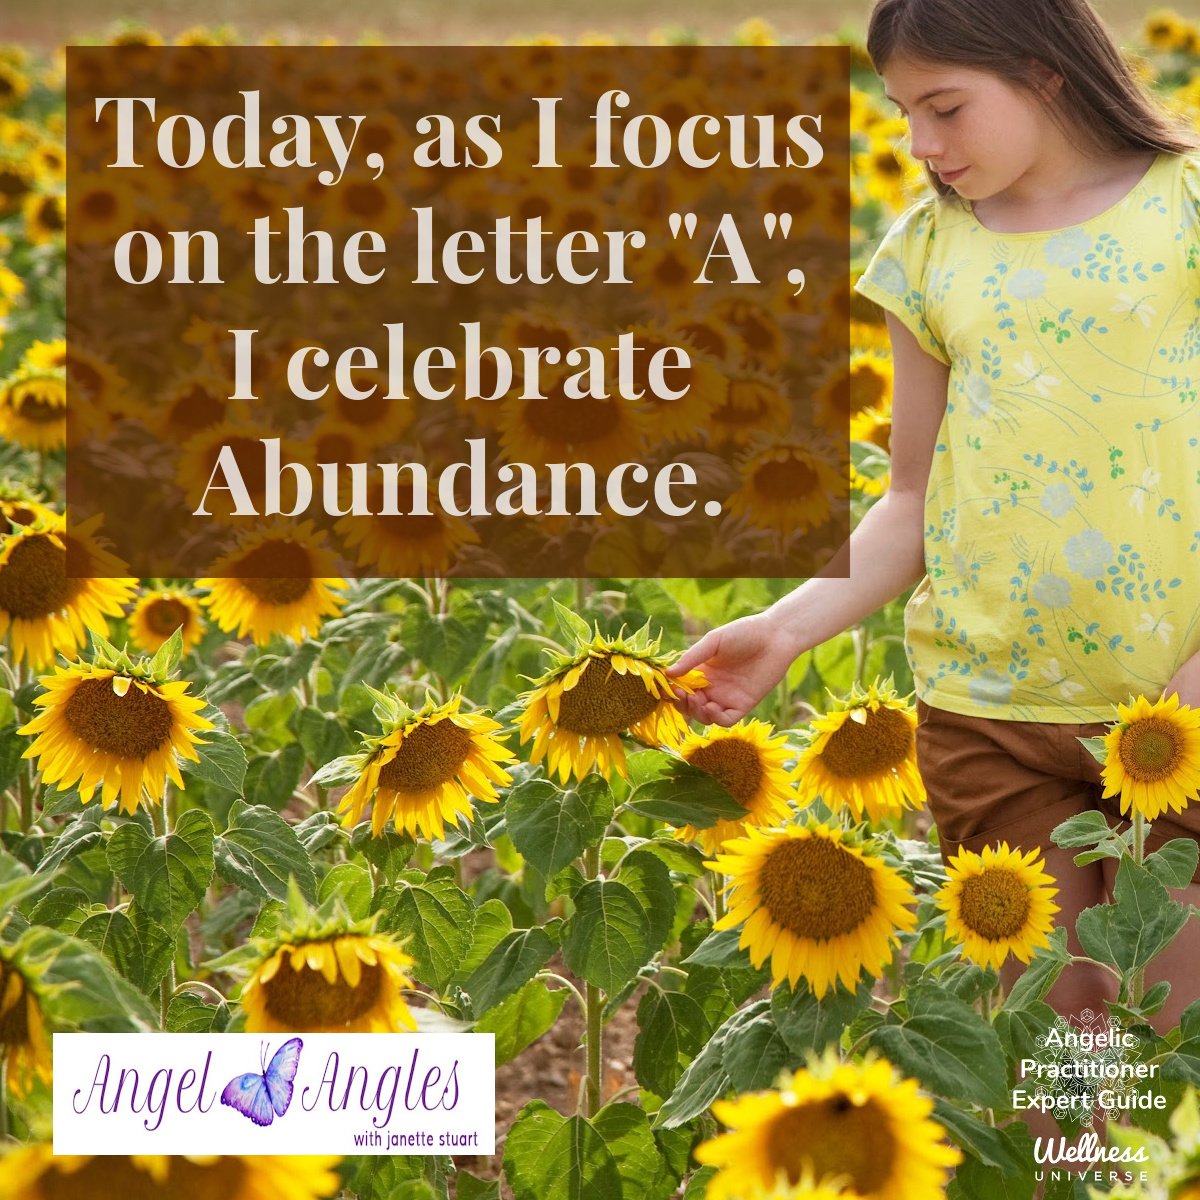 Hello, one and all, and welcome to your Angel Affirmation for Sat. June 1, 2024. 

This month, we're focusing on a different letter of the alphabet and an applicable affirmation. 

Today, as I focus on the letter &quot;A&quot;, I celebrate Abundance.